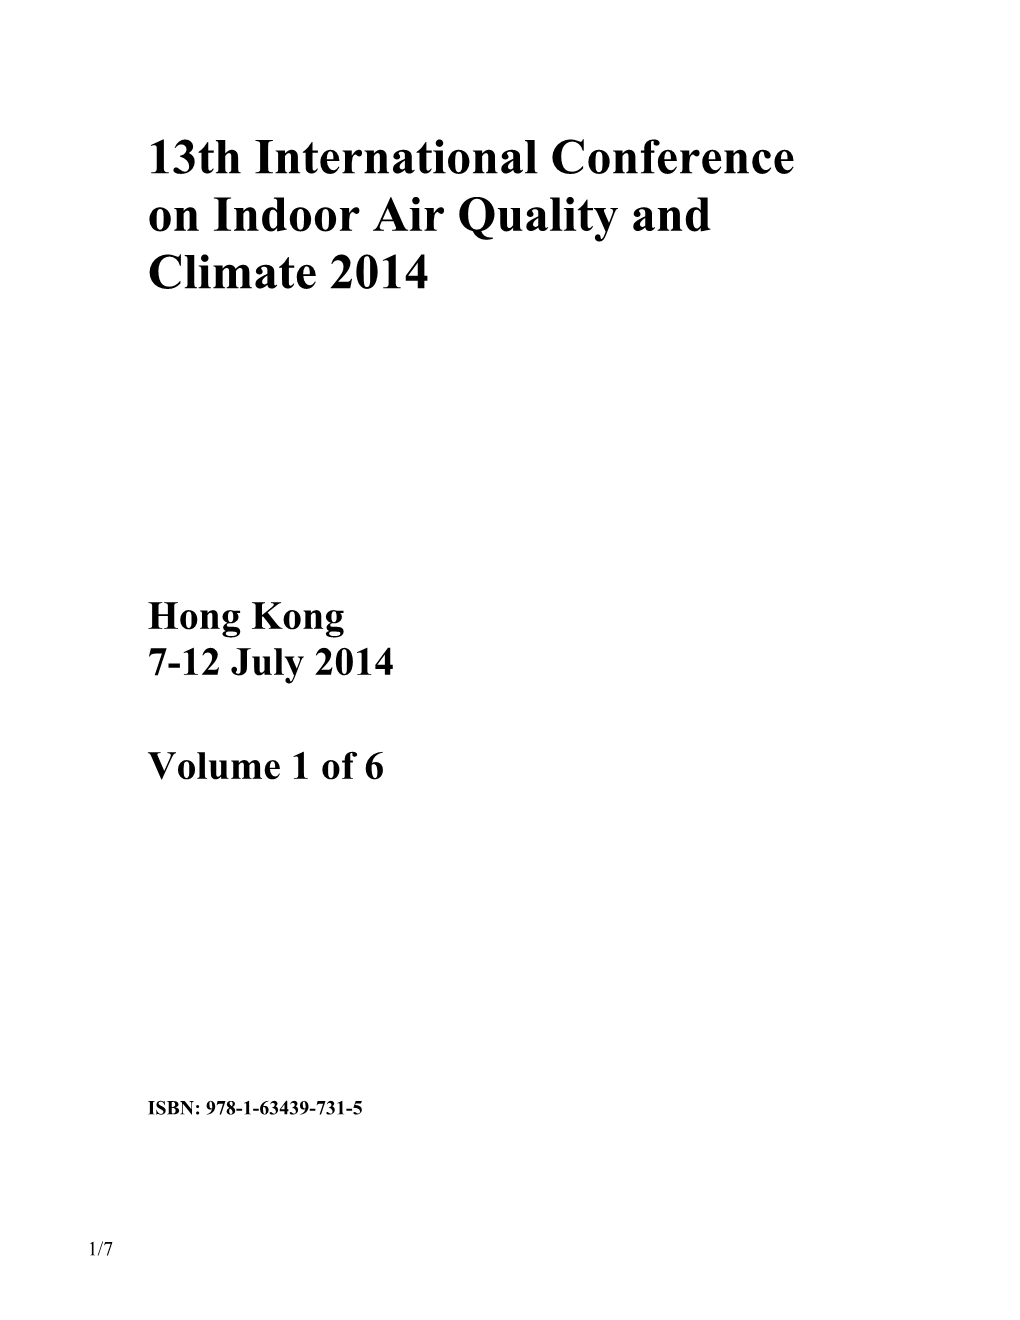 13Th International Conference on Indoor Air Quality and Climate 2014